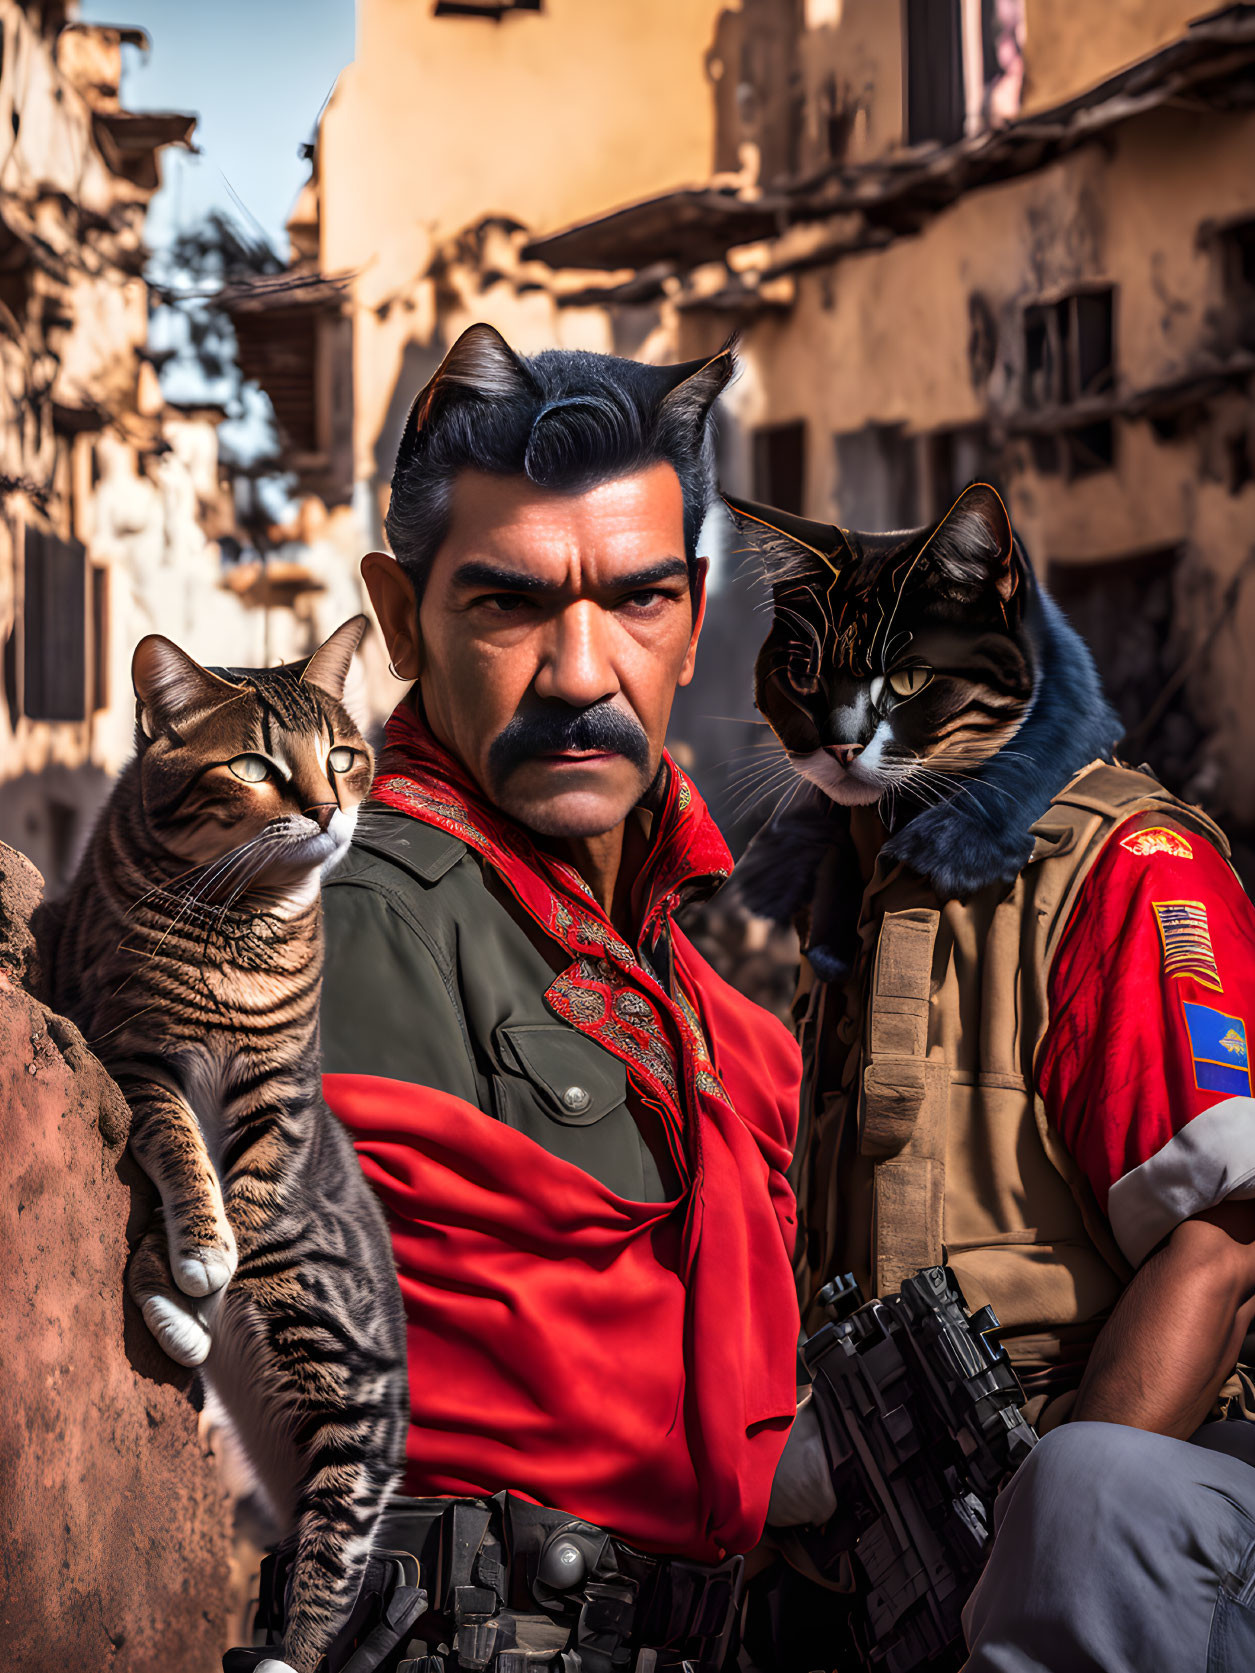 Serious man with mustache in red military attire with two expressive cats in alleyway